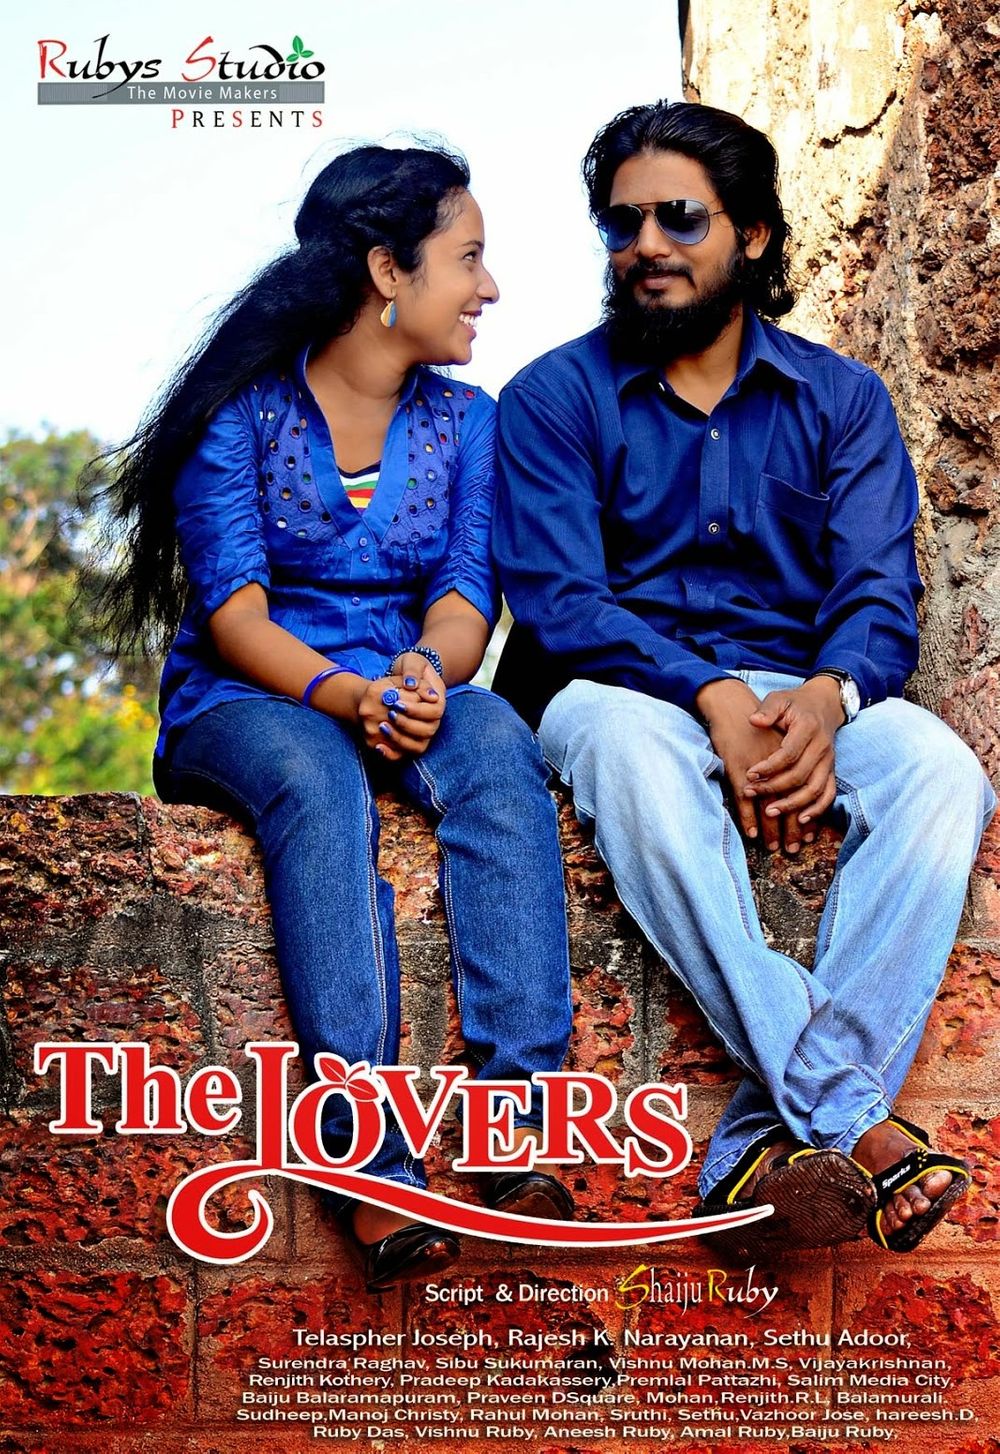 The Lovers (2016 Film)